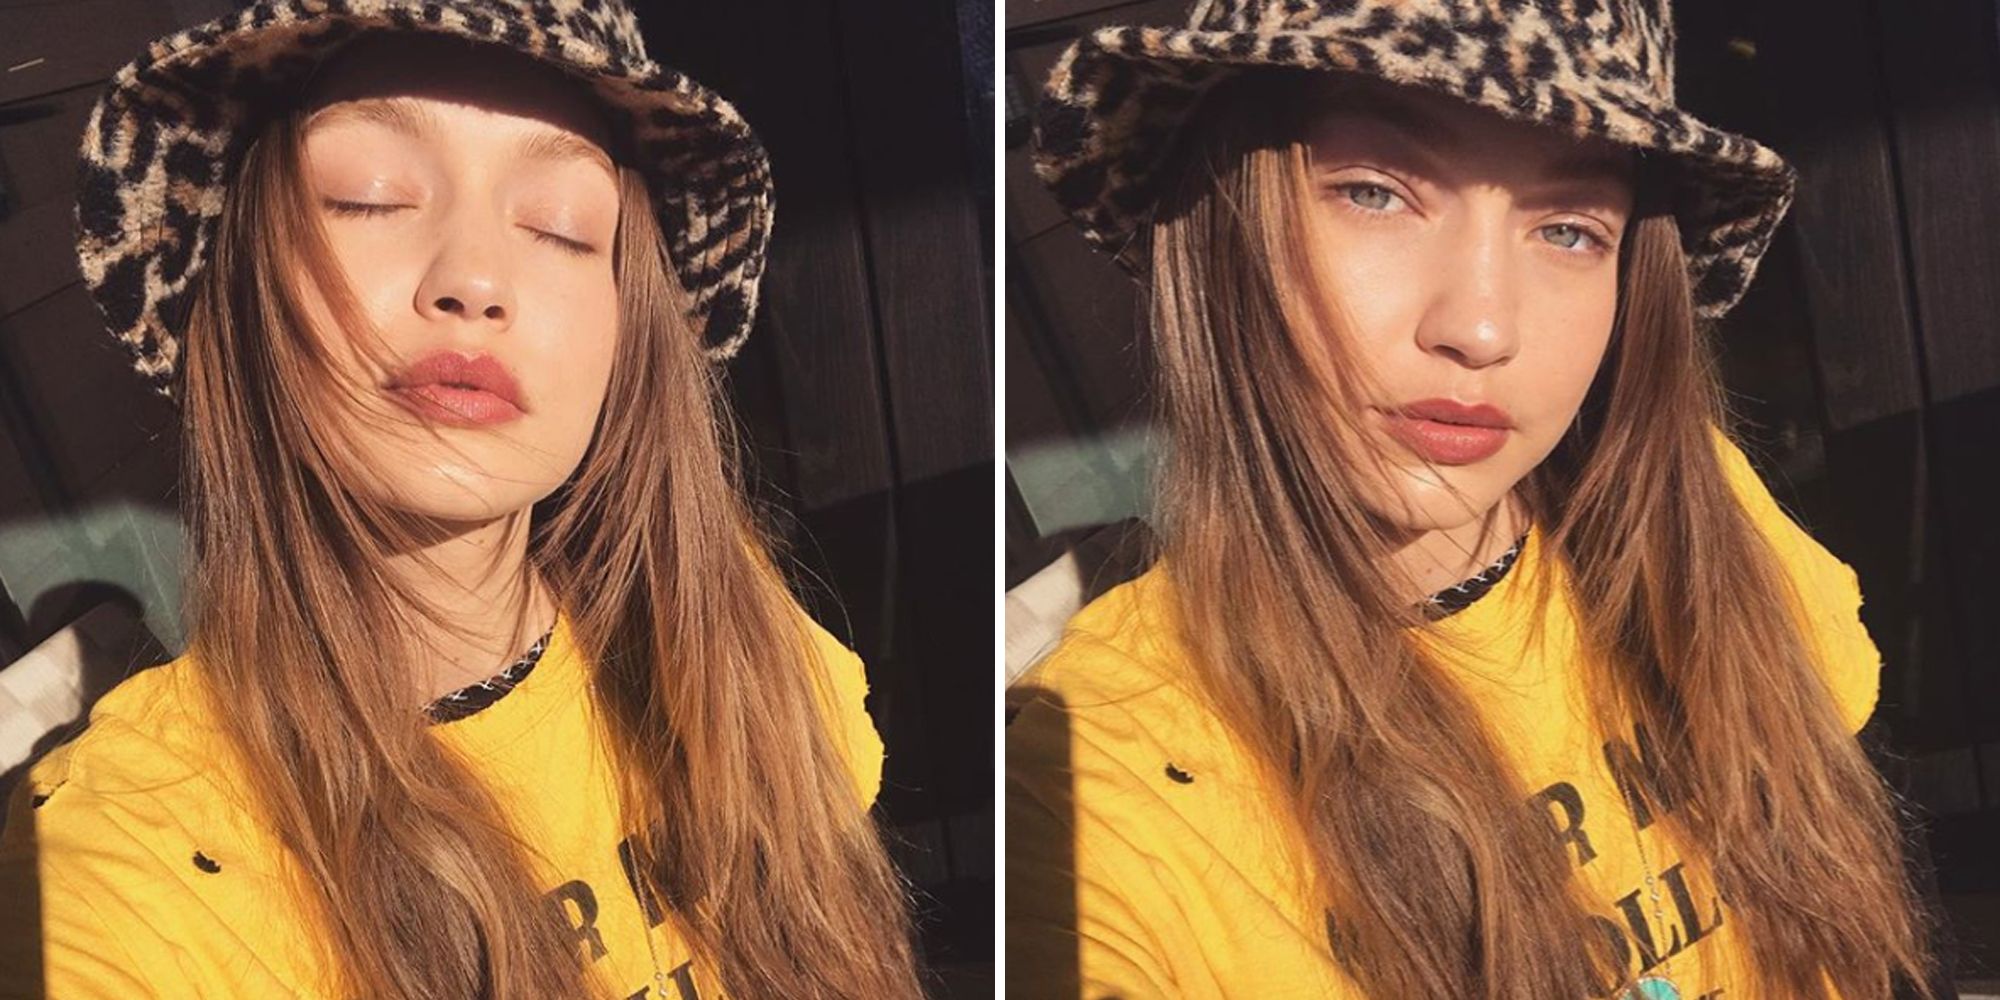 Gigi Hadid Wears a Plaid Coat, Fuzzy Hat for a Walk with Her Baby